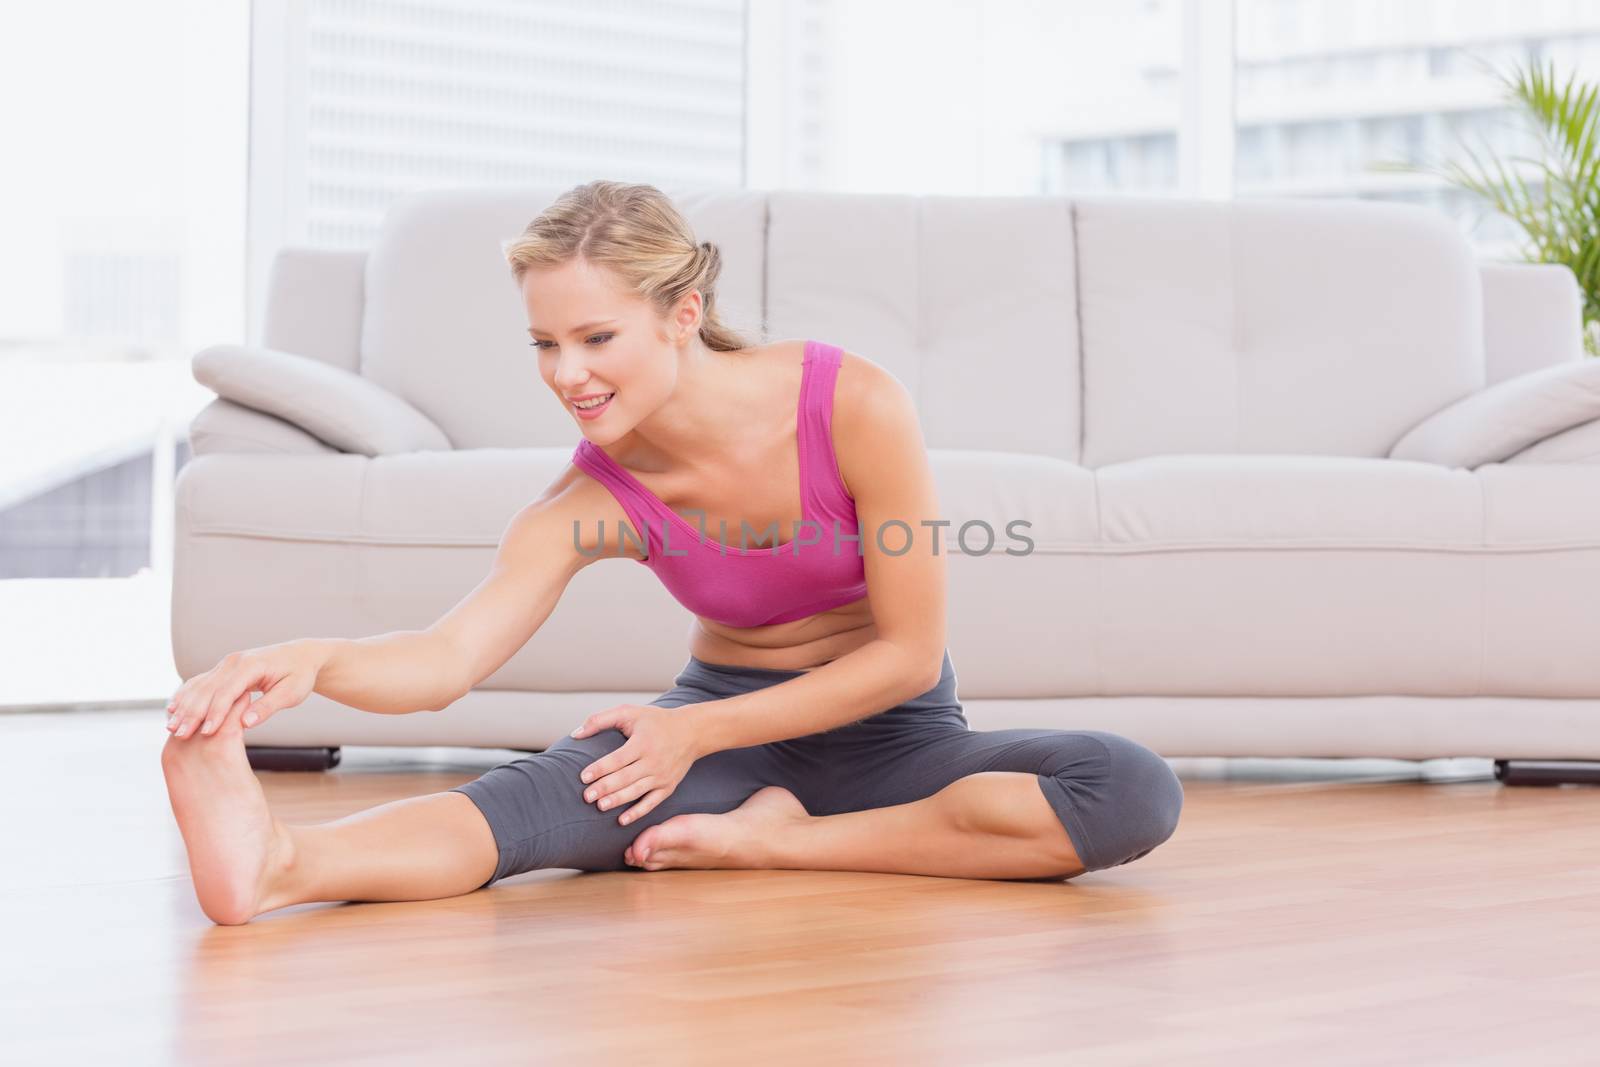 Fit blonde sitting on floor stretching her leg at home in the living room